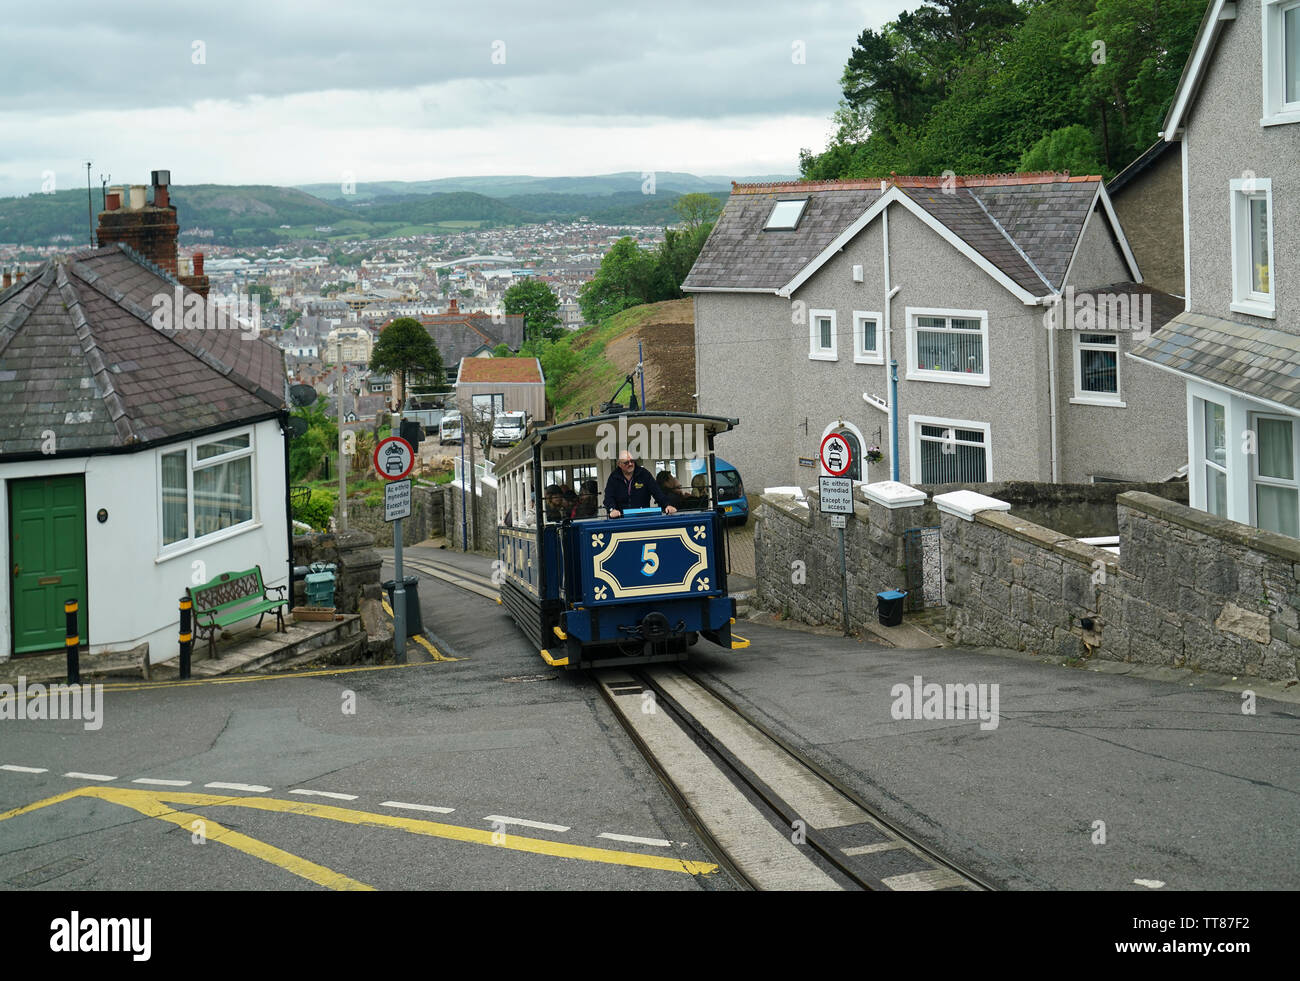 Great Orme Tramway Car No.5 Ascending Old Road -2 Stock Photo